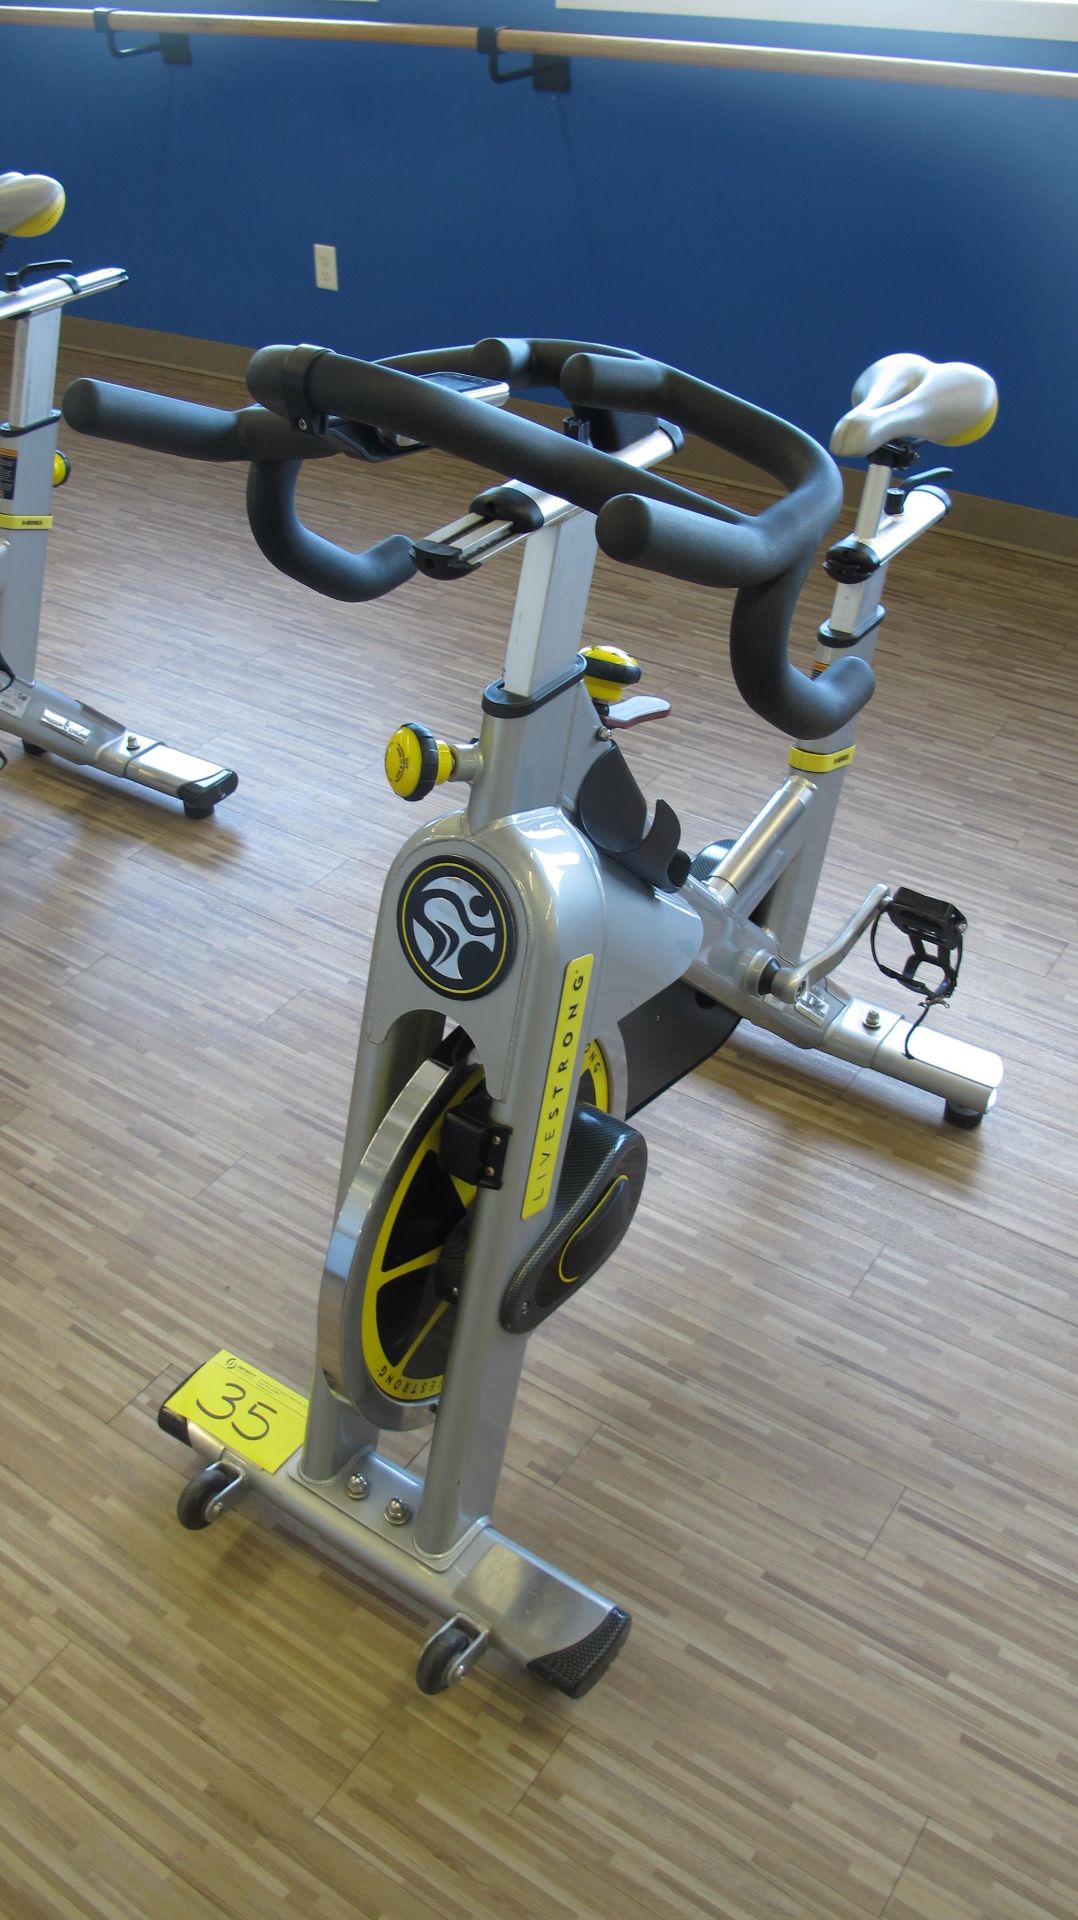 LIVESTRONG LS S-Series Class S Stationary Spin Bike, S/N: LASB0008036-111 - Image 4 of 10